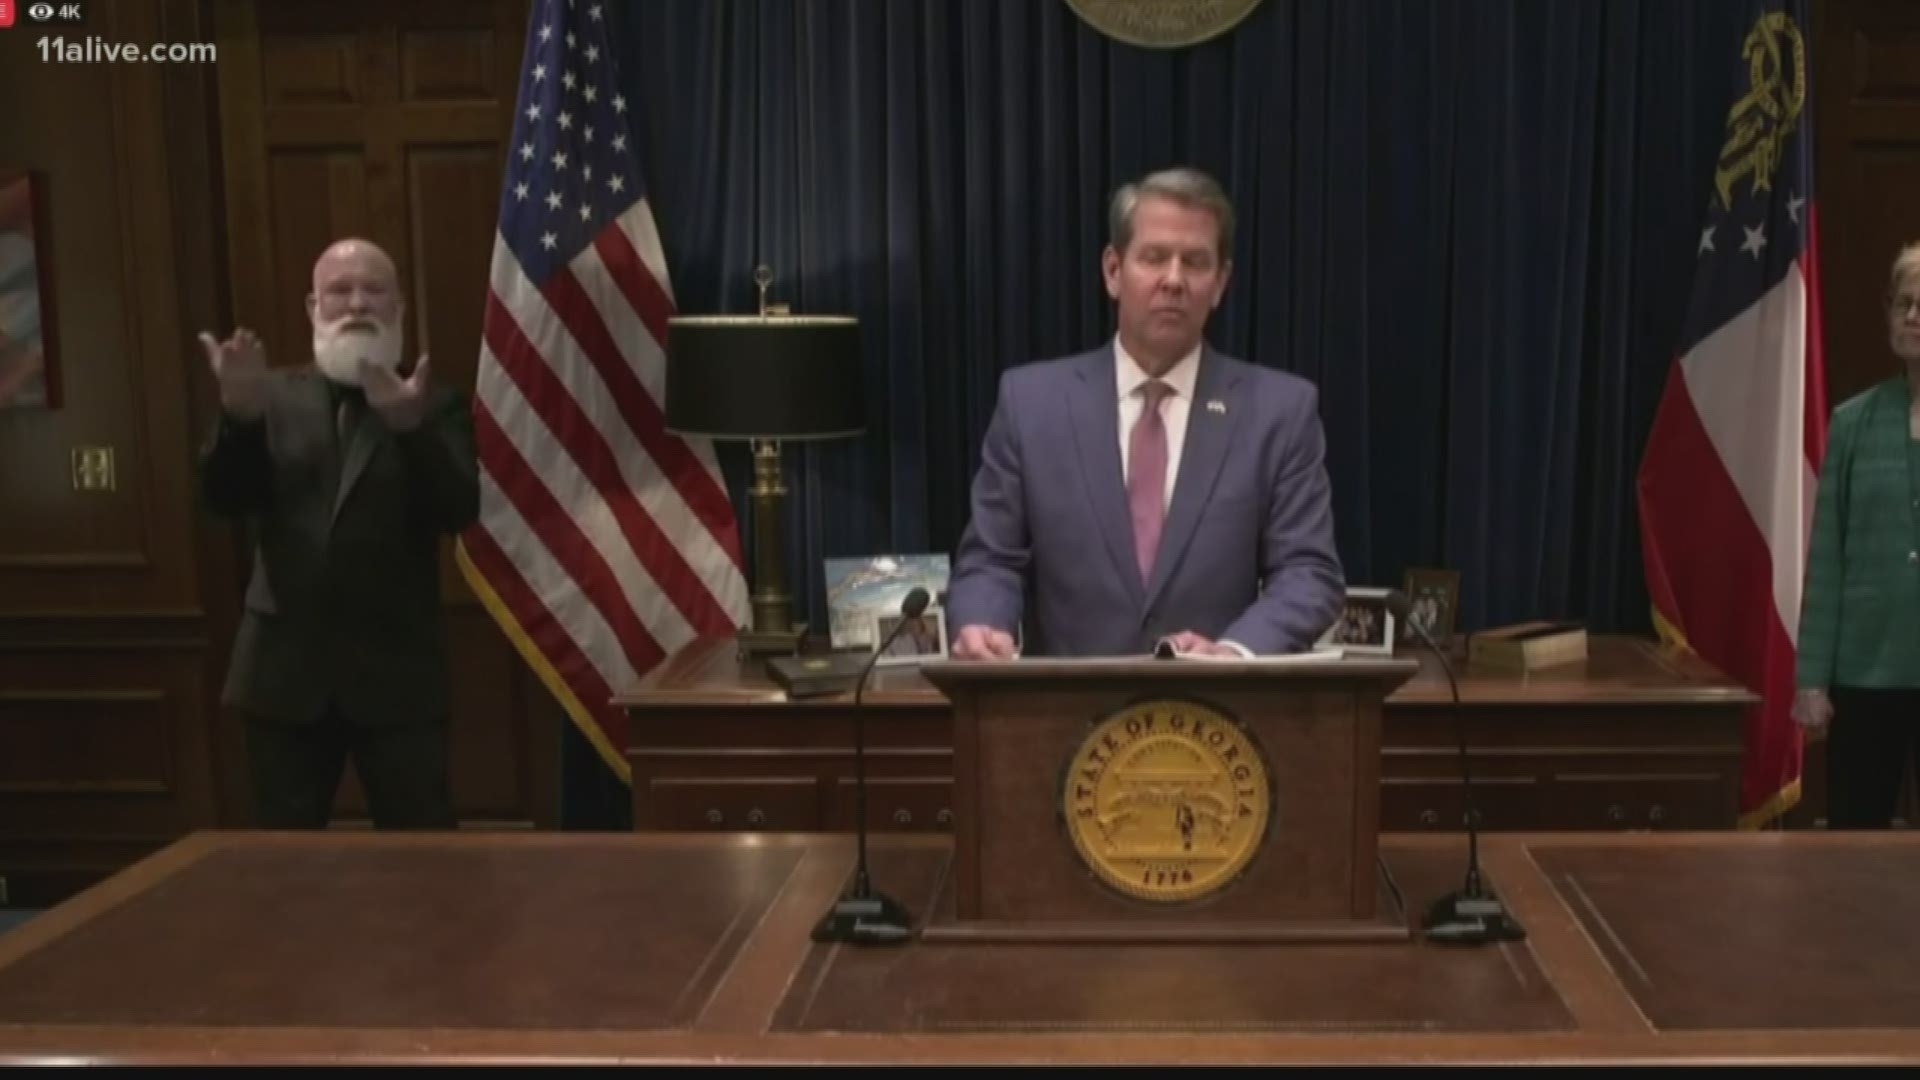 In an afternoon press conference, Georgia governor Brian Kemp announced the state now has a dedicated hotline for all COVID-19 inquiries.